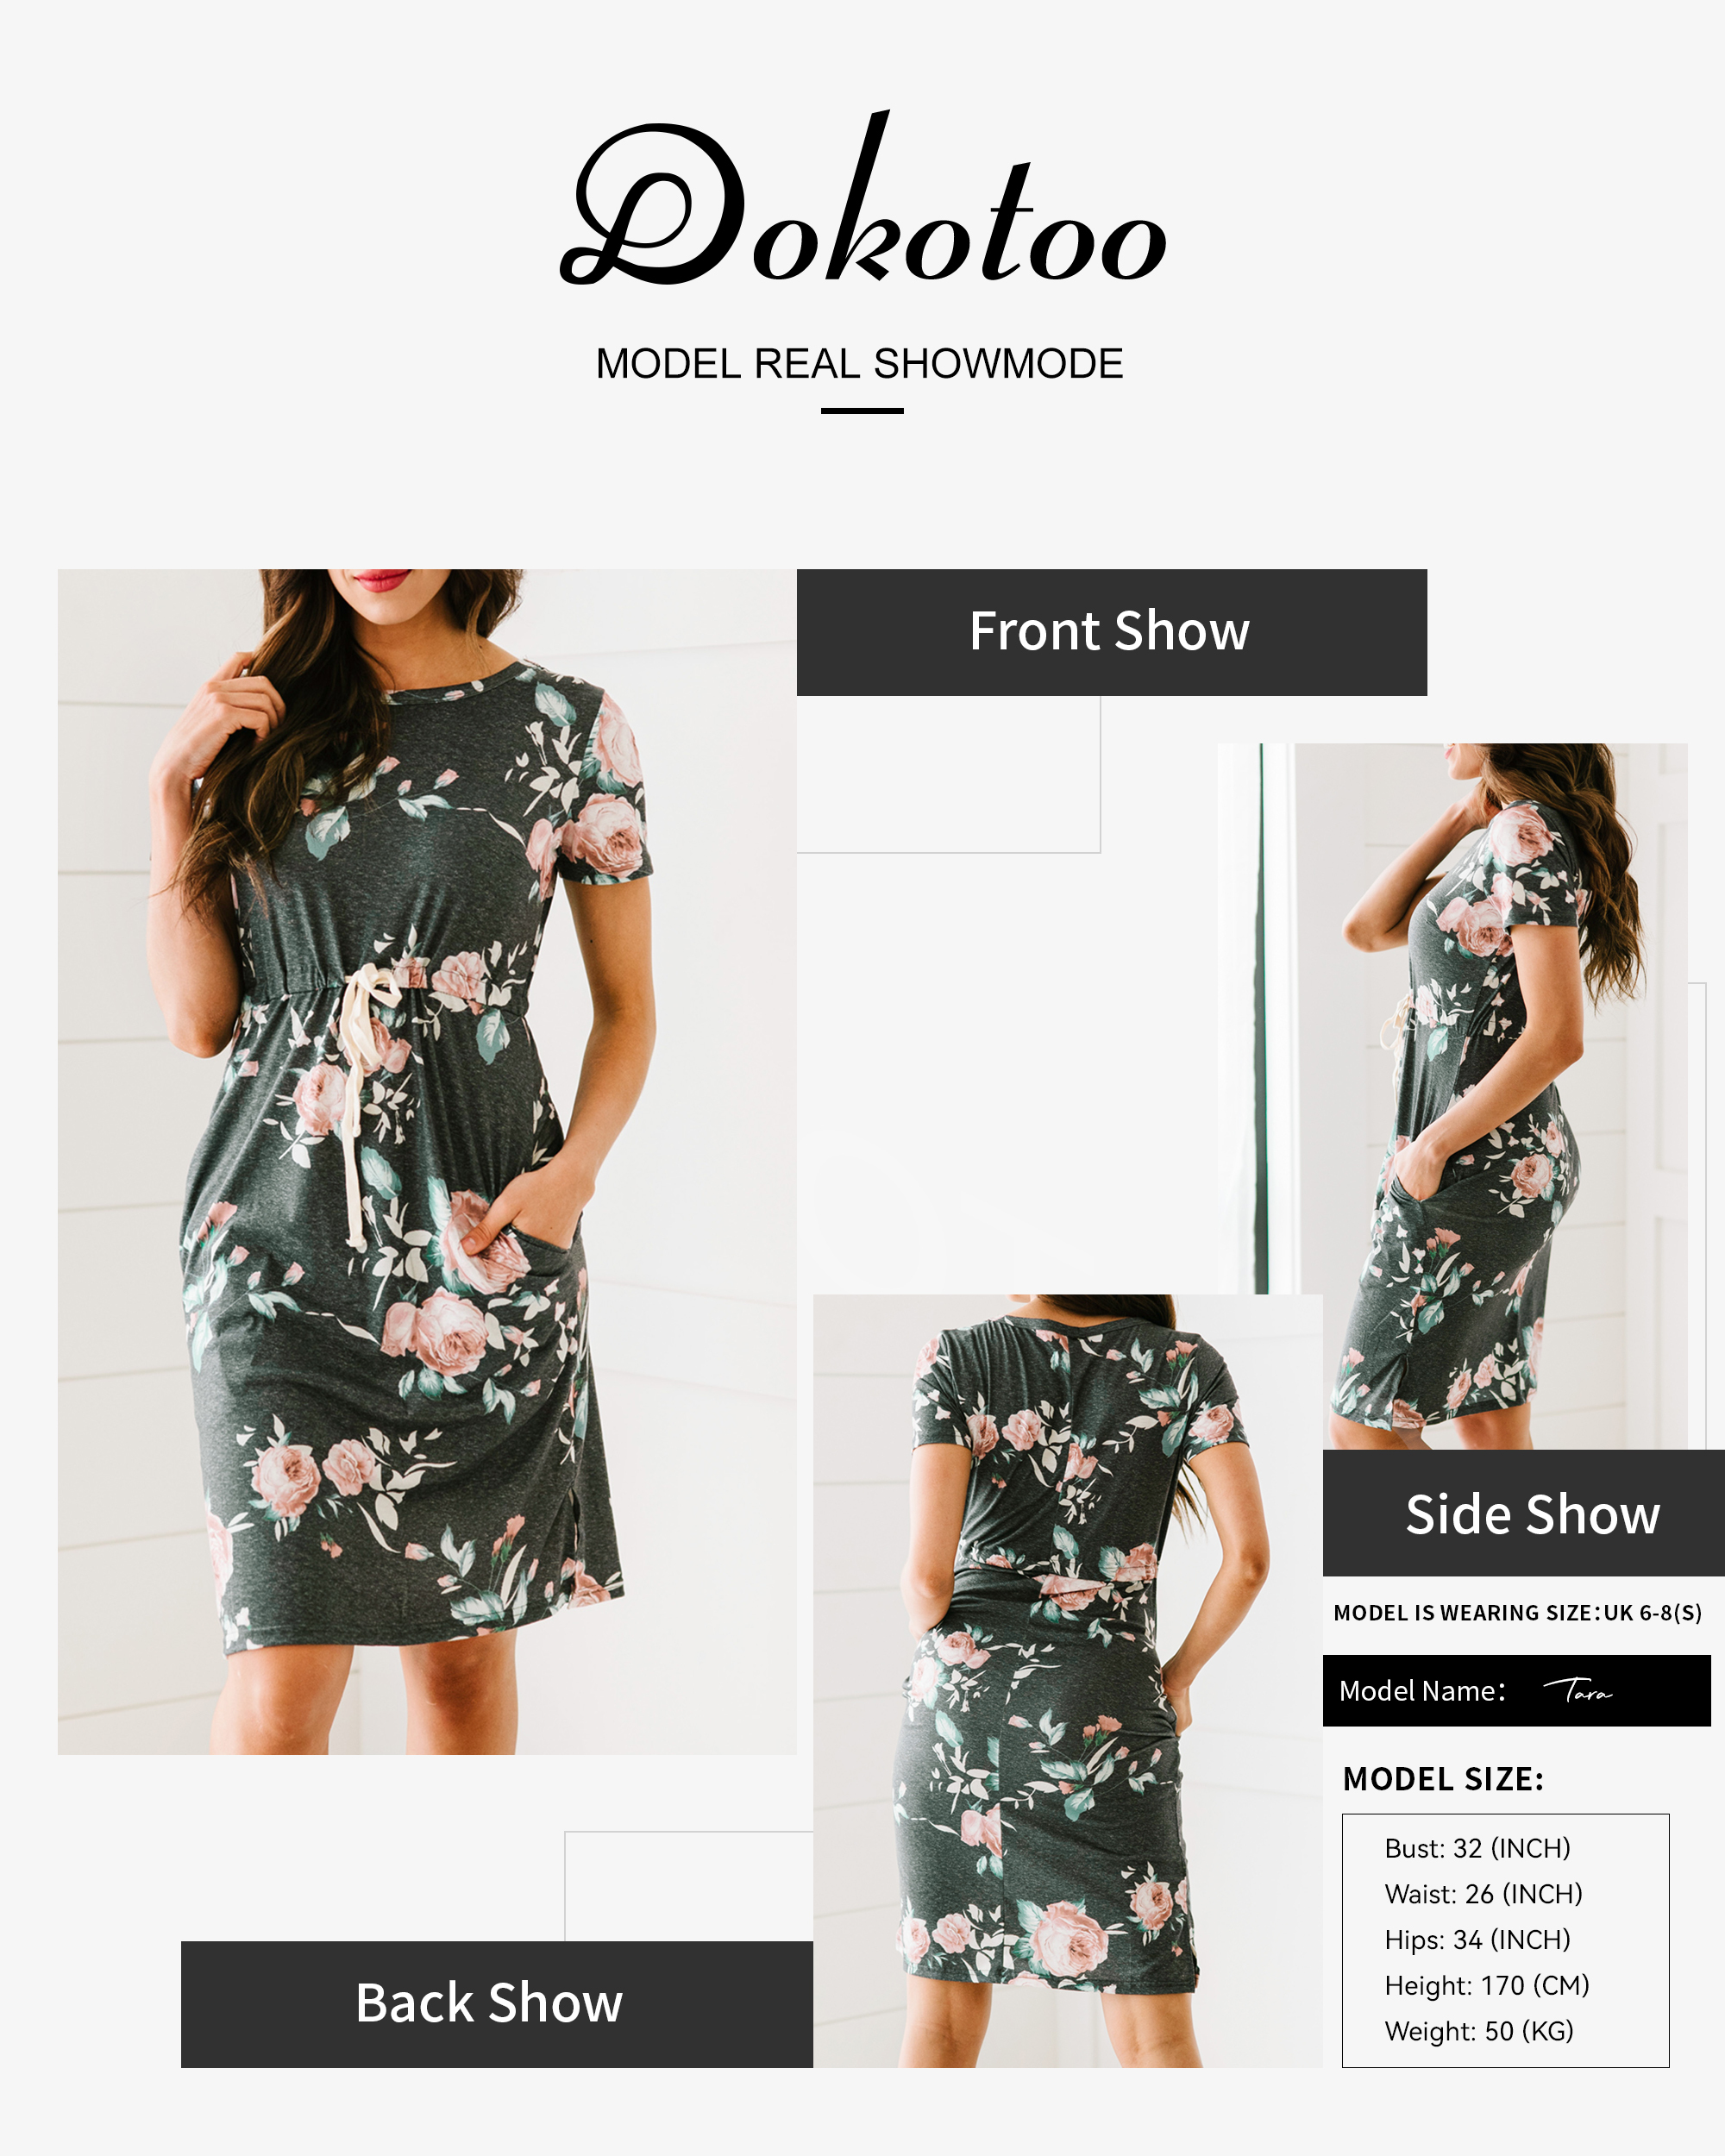 Dokotoo Women's Beach A Line Floral Print Casual Drawstring Waist Side Split T-Shirt Dresses with Pockets Short Sleeve Boat Neck Summer Loose Dress S-XL - image 2 of 7